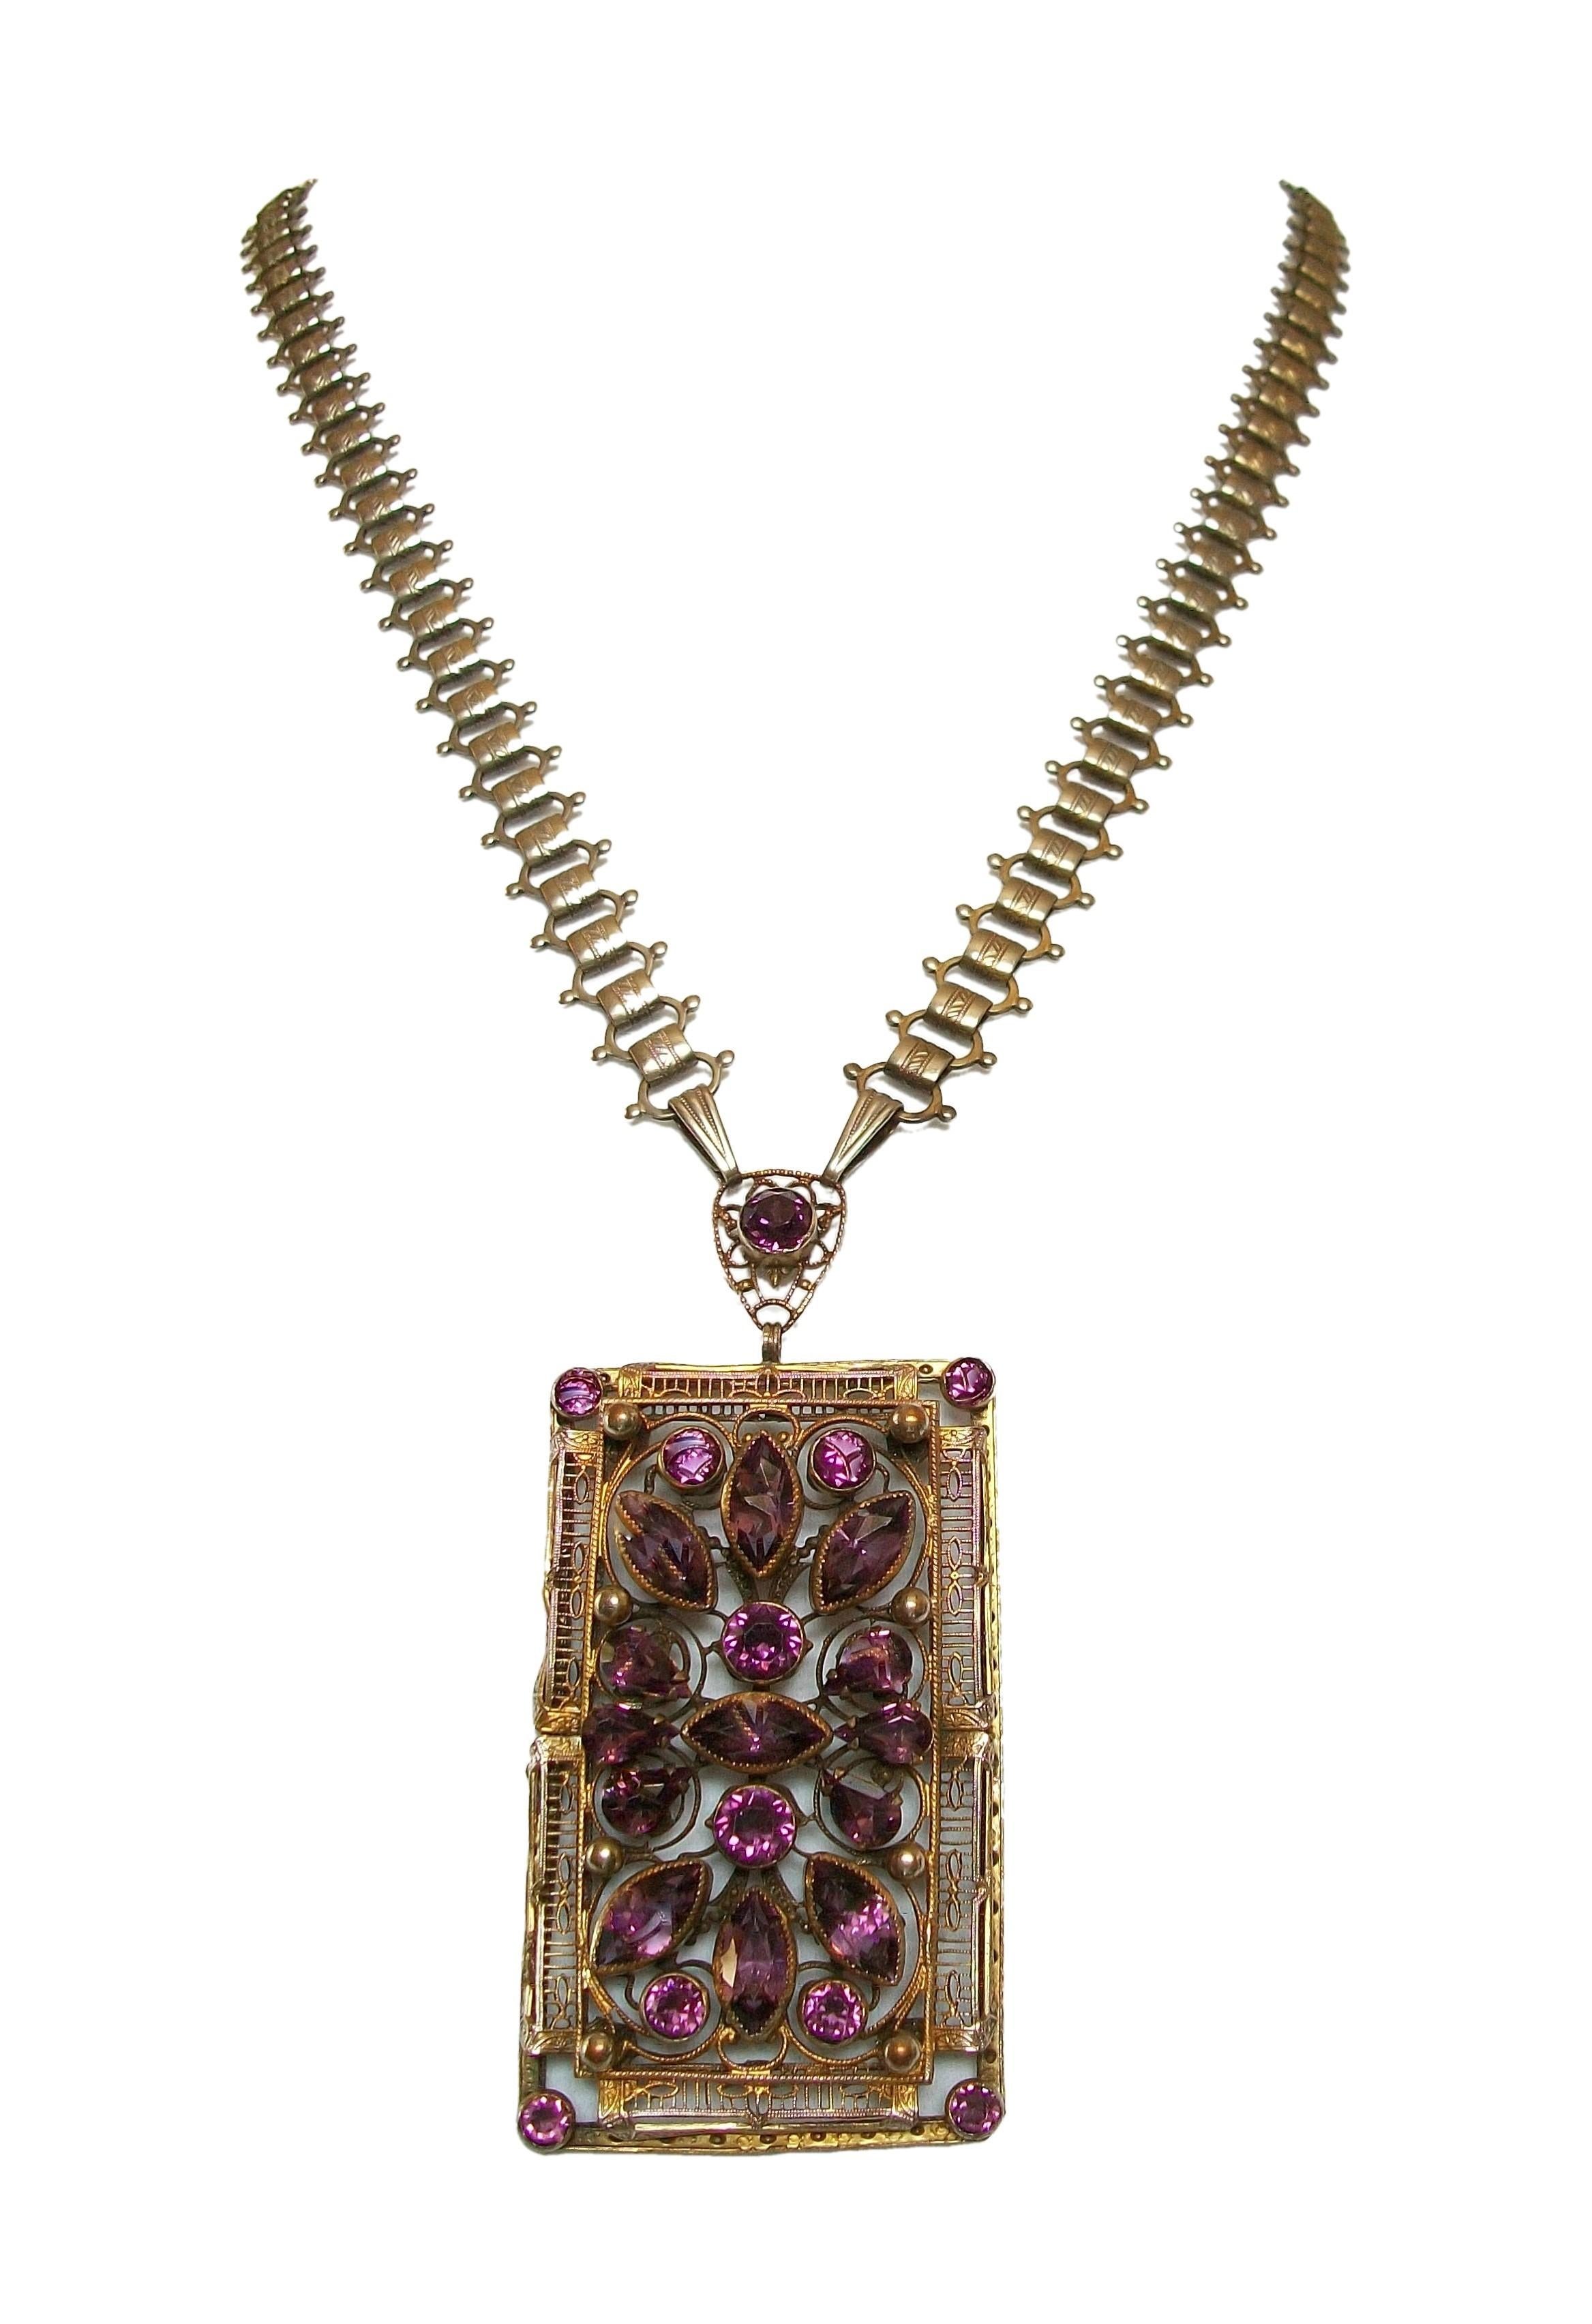 Antique Victorian amethyst paste pendant and chain - rare quality period piece - large and dramatic size - the pendant set with various marquis and round shaped purple amethyst glass stones - all set on a gilded filigree backing with tooled frame -